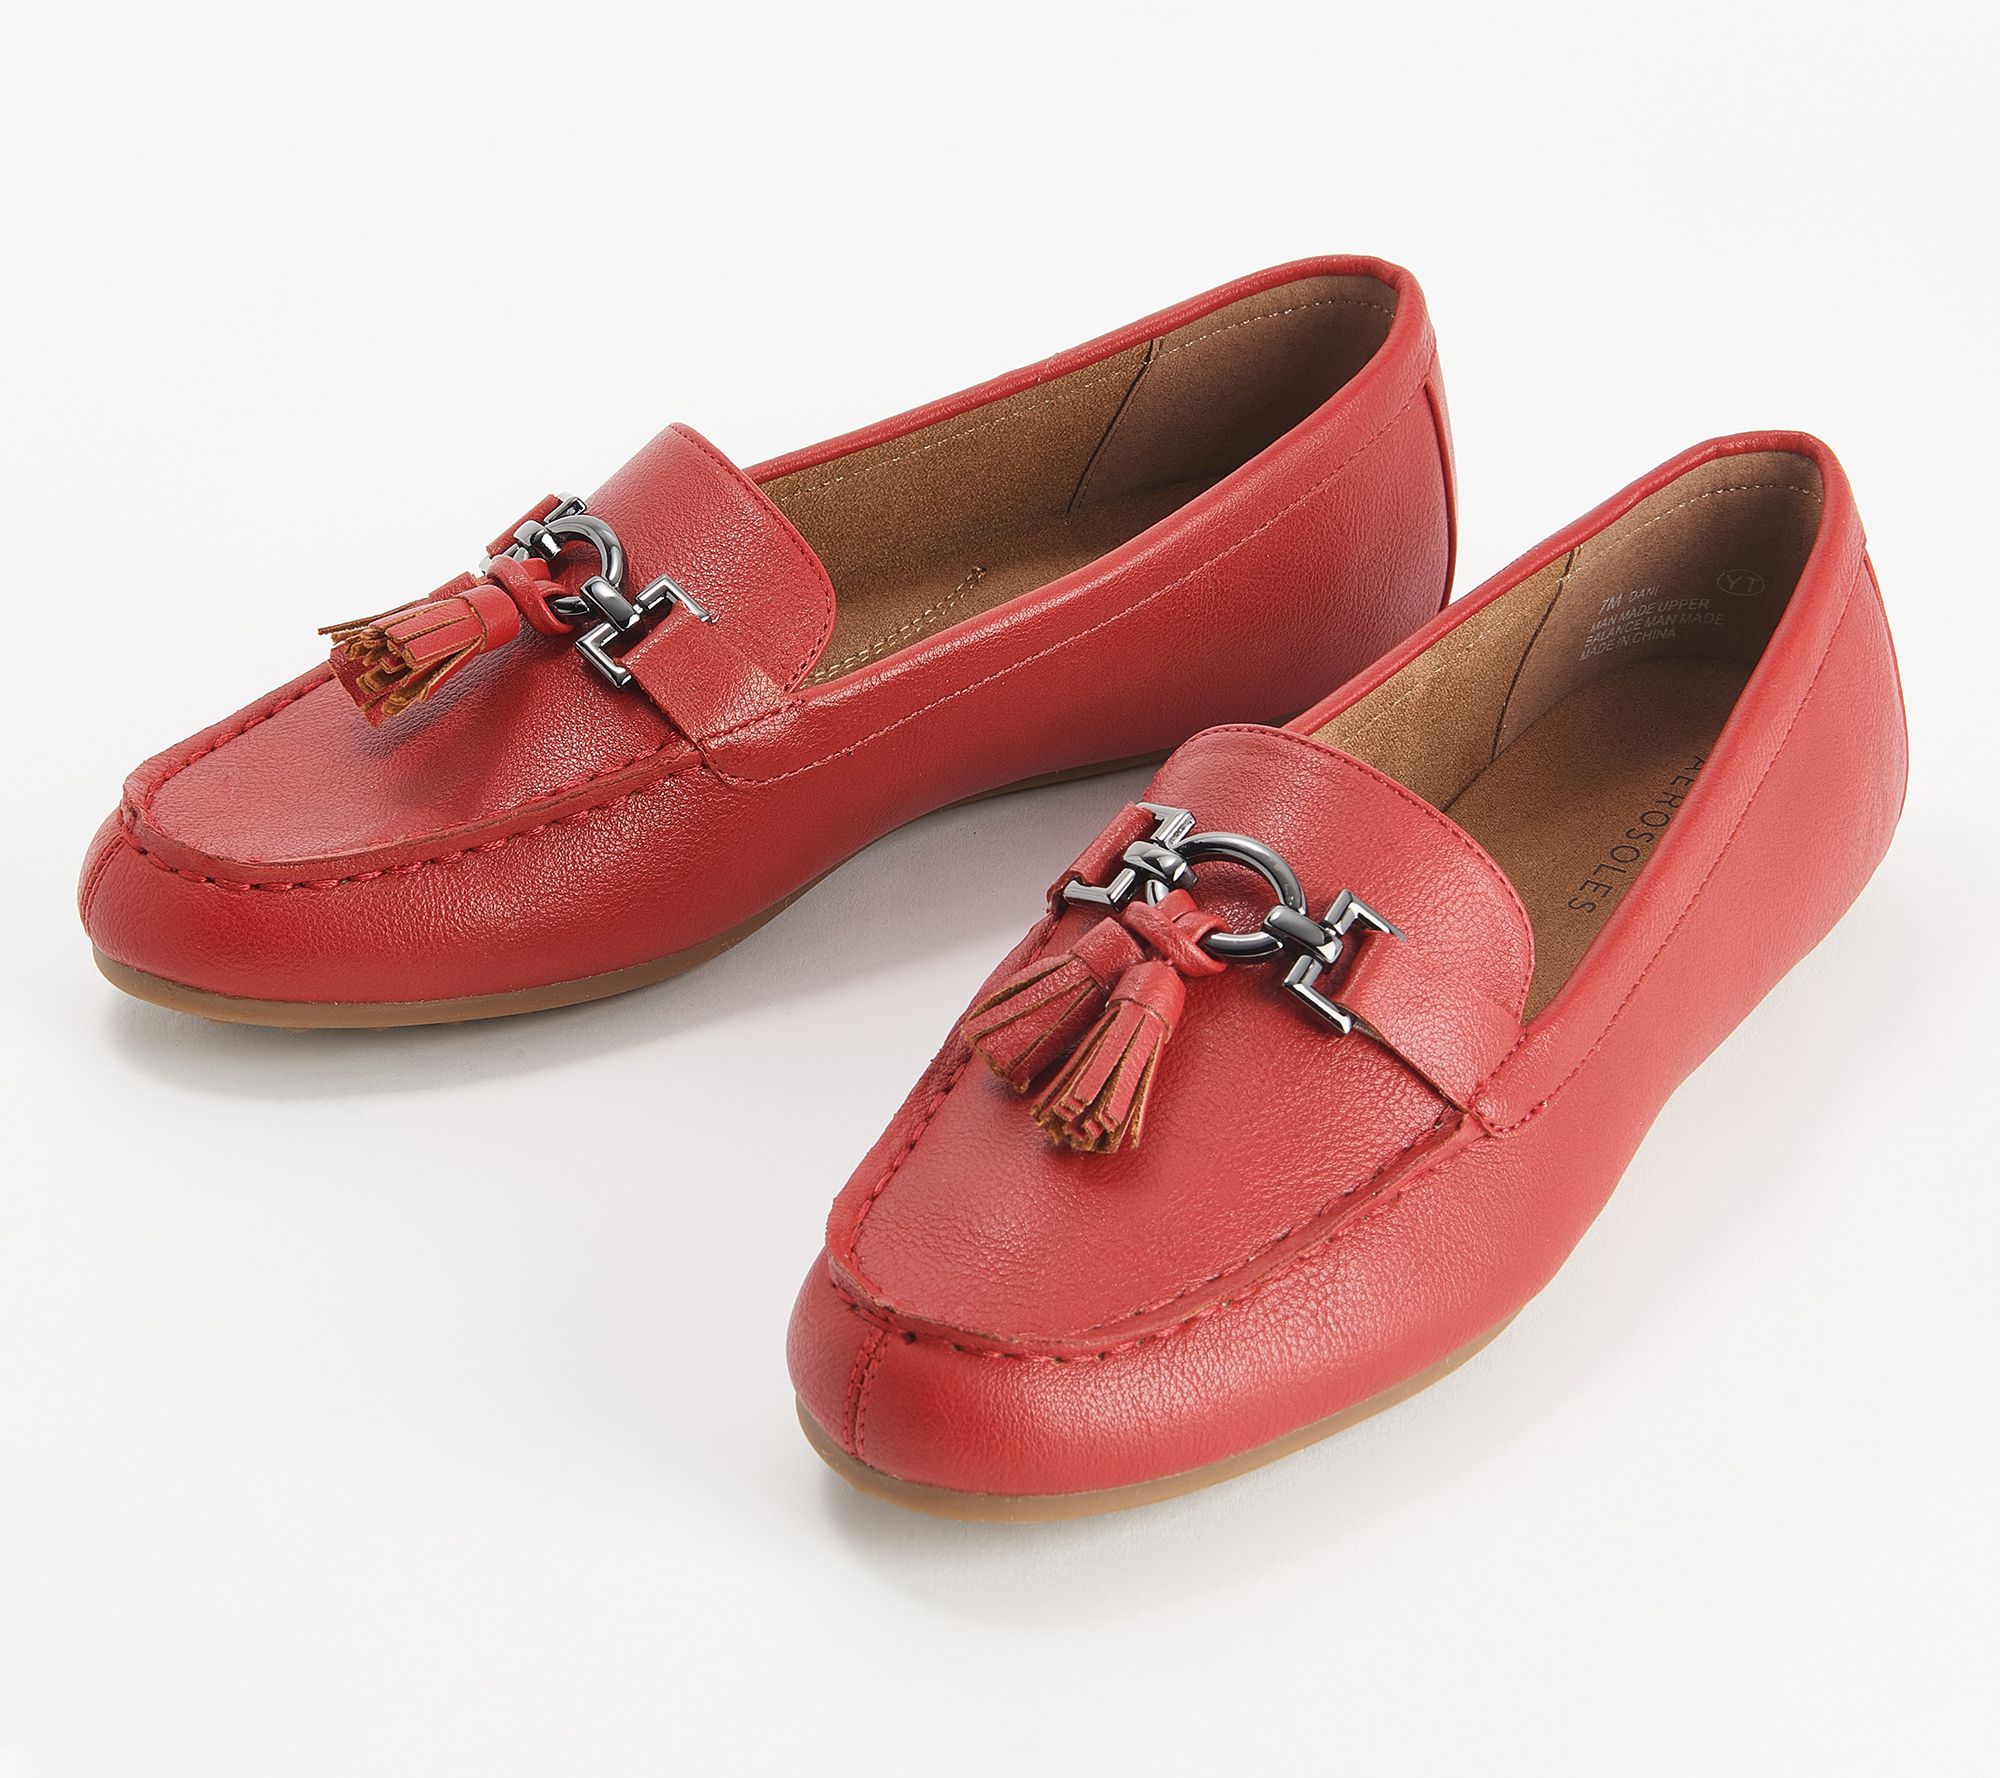 Louise Louise Women's Loafers - Red - US 7.5